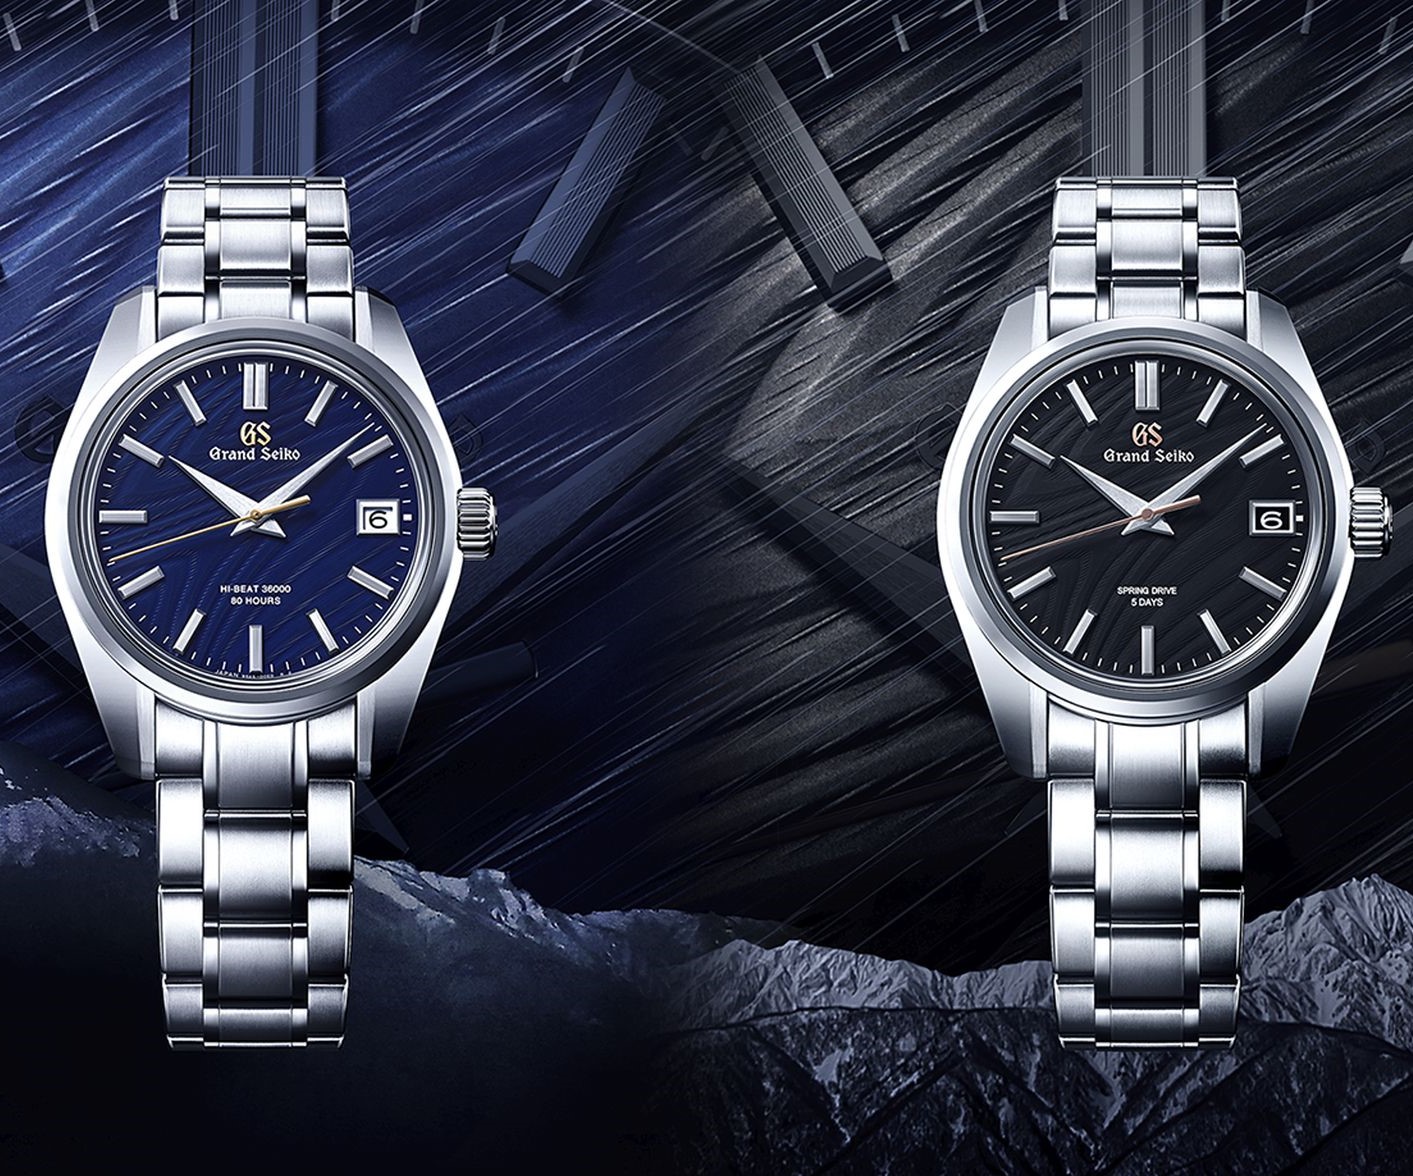 Introducing The Grand Seiko 44GS 55th Anniversary High Beat SLGH009 And  Spring Drive SLGA013 Limited Edition Watches